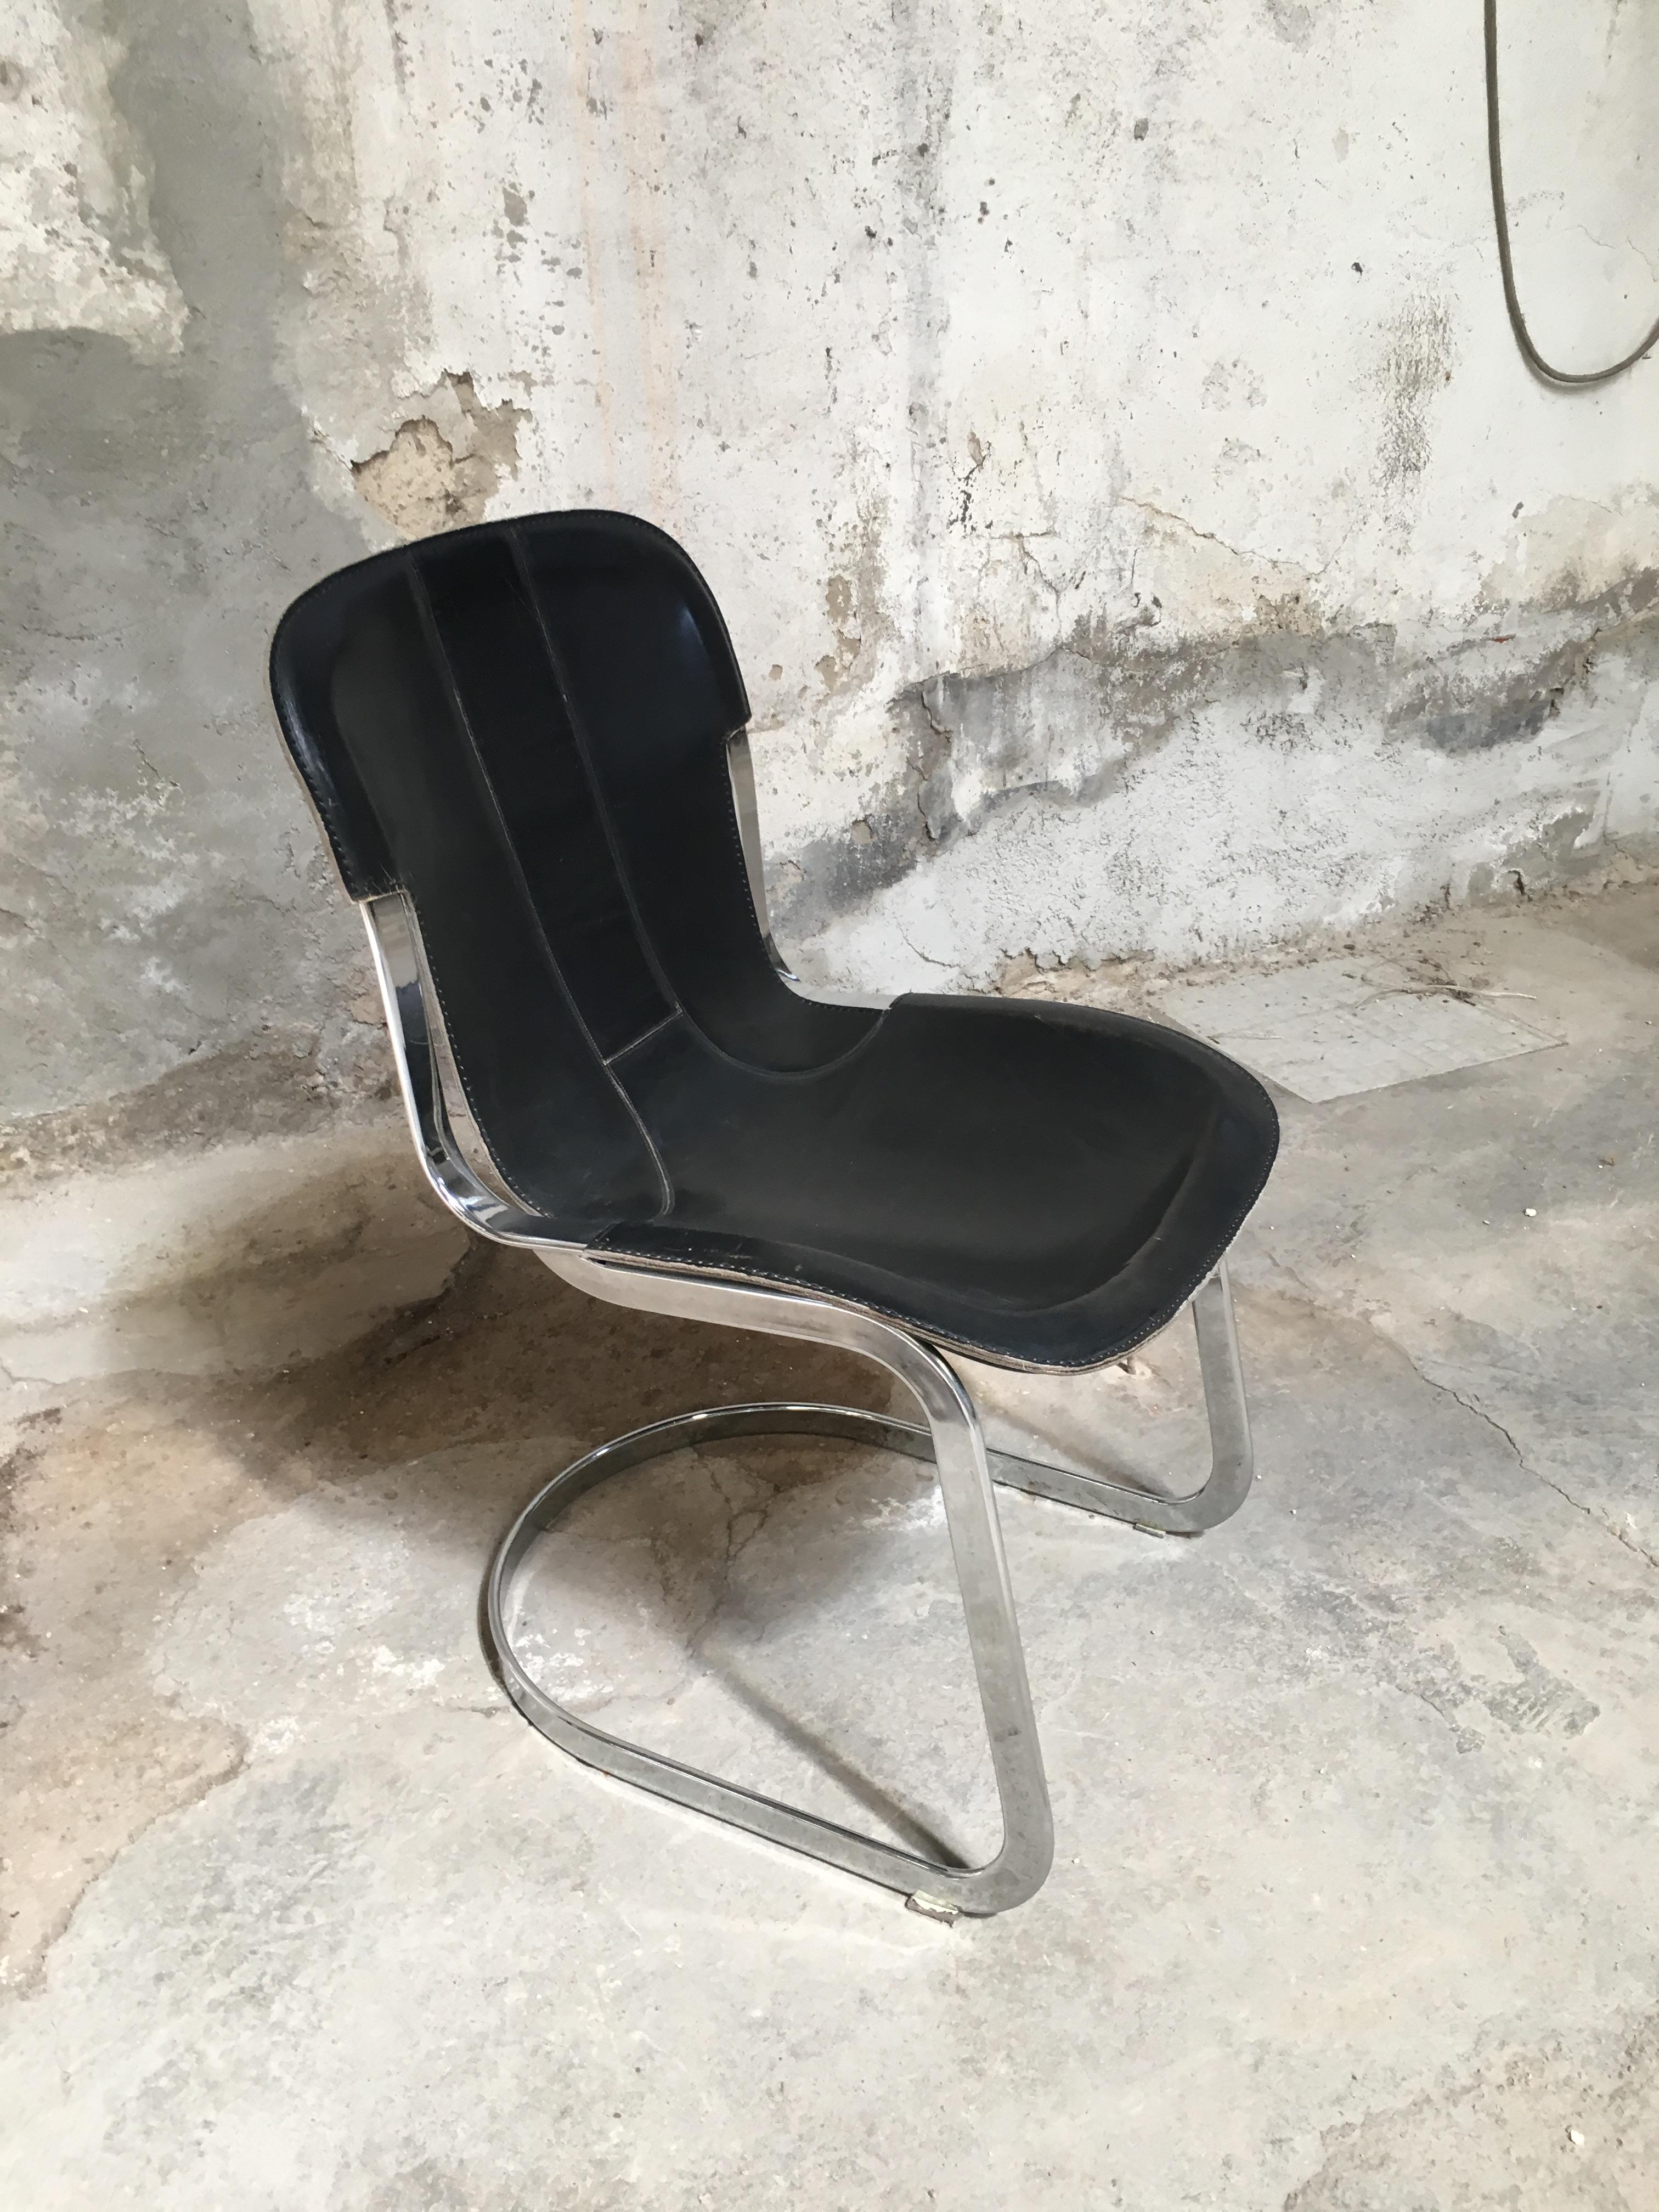 Four Italian Chairs with Original Black Leather Seat by Willy Rizzo for Cidue 9